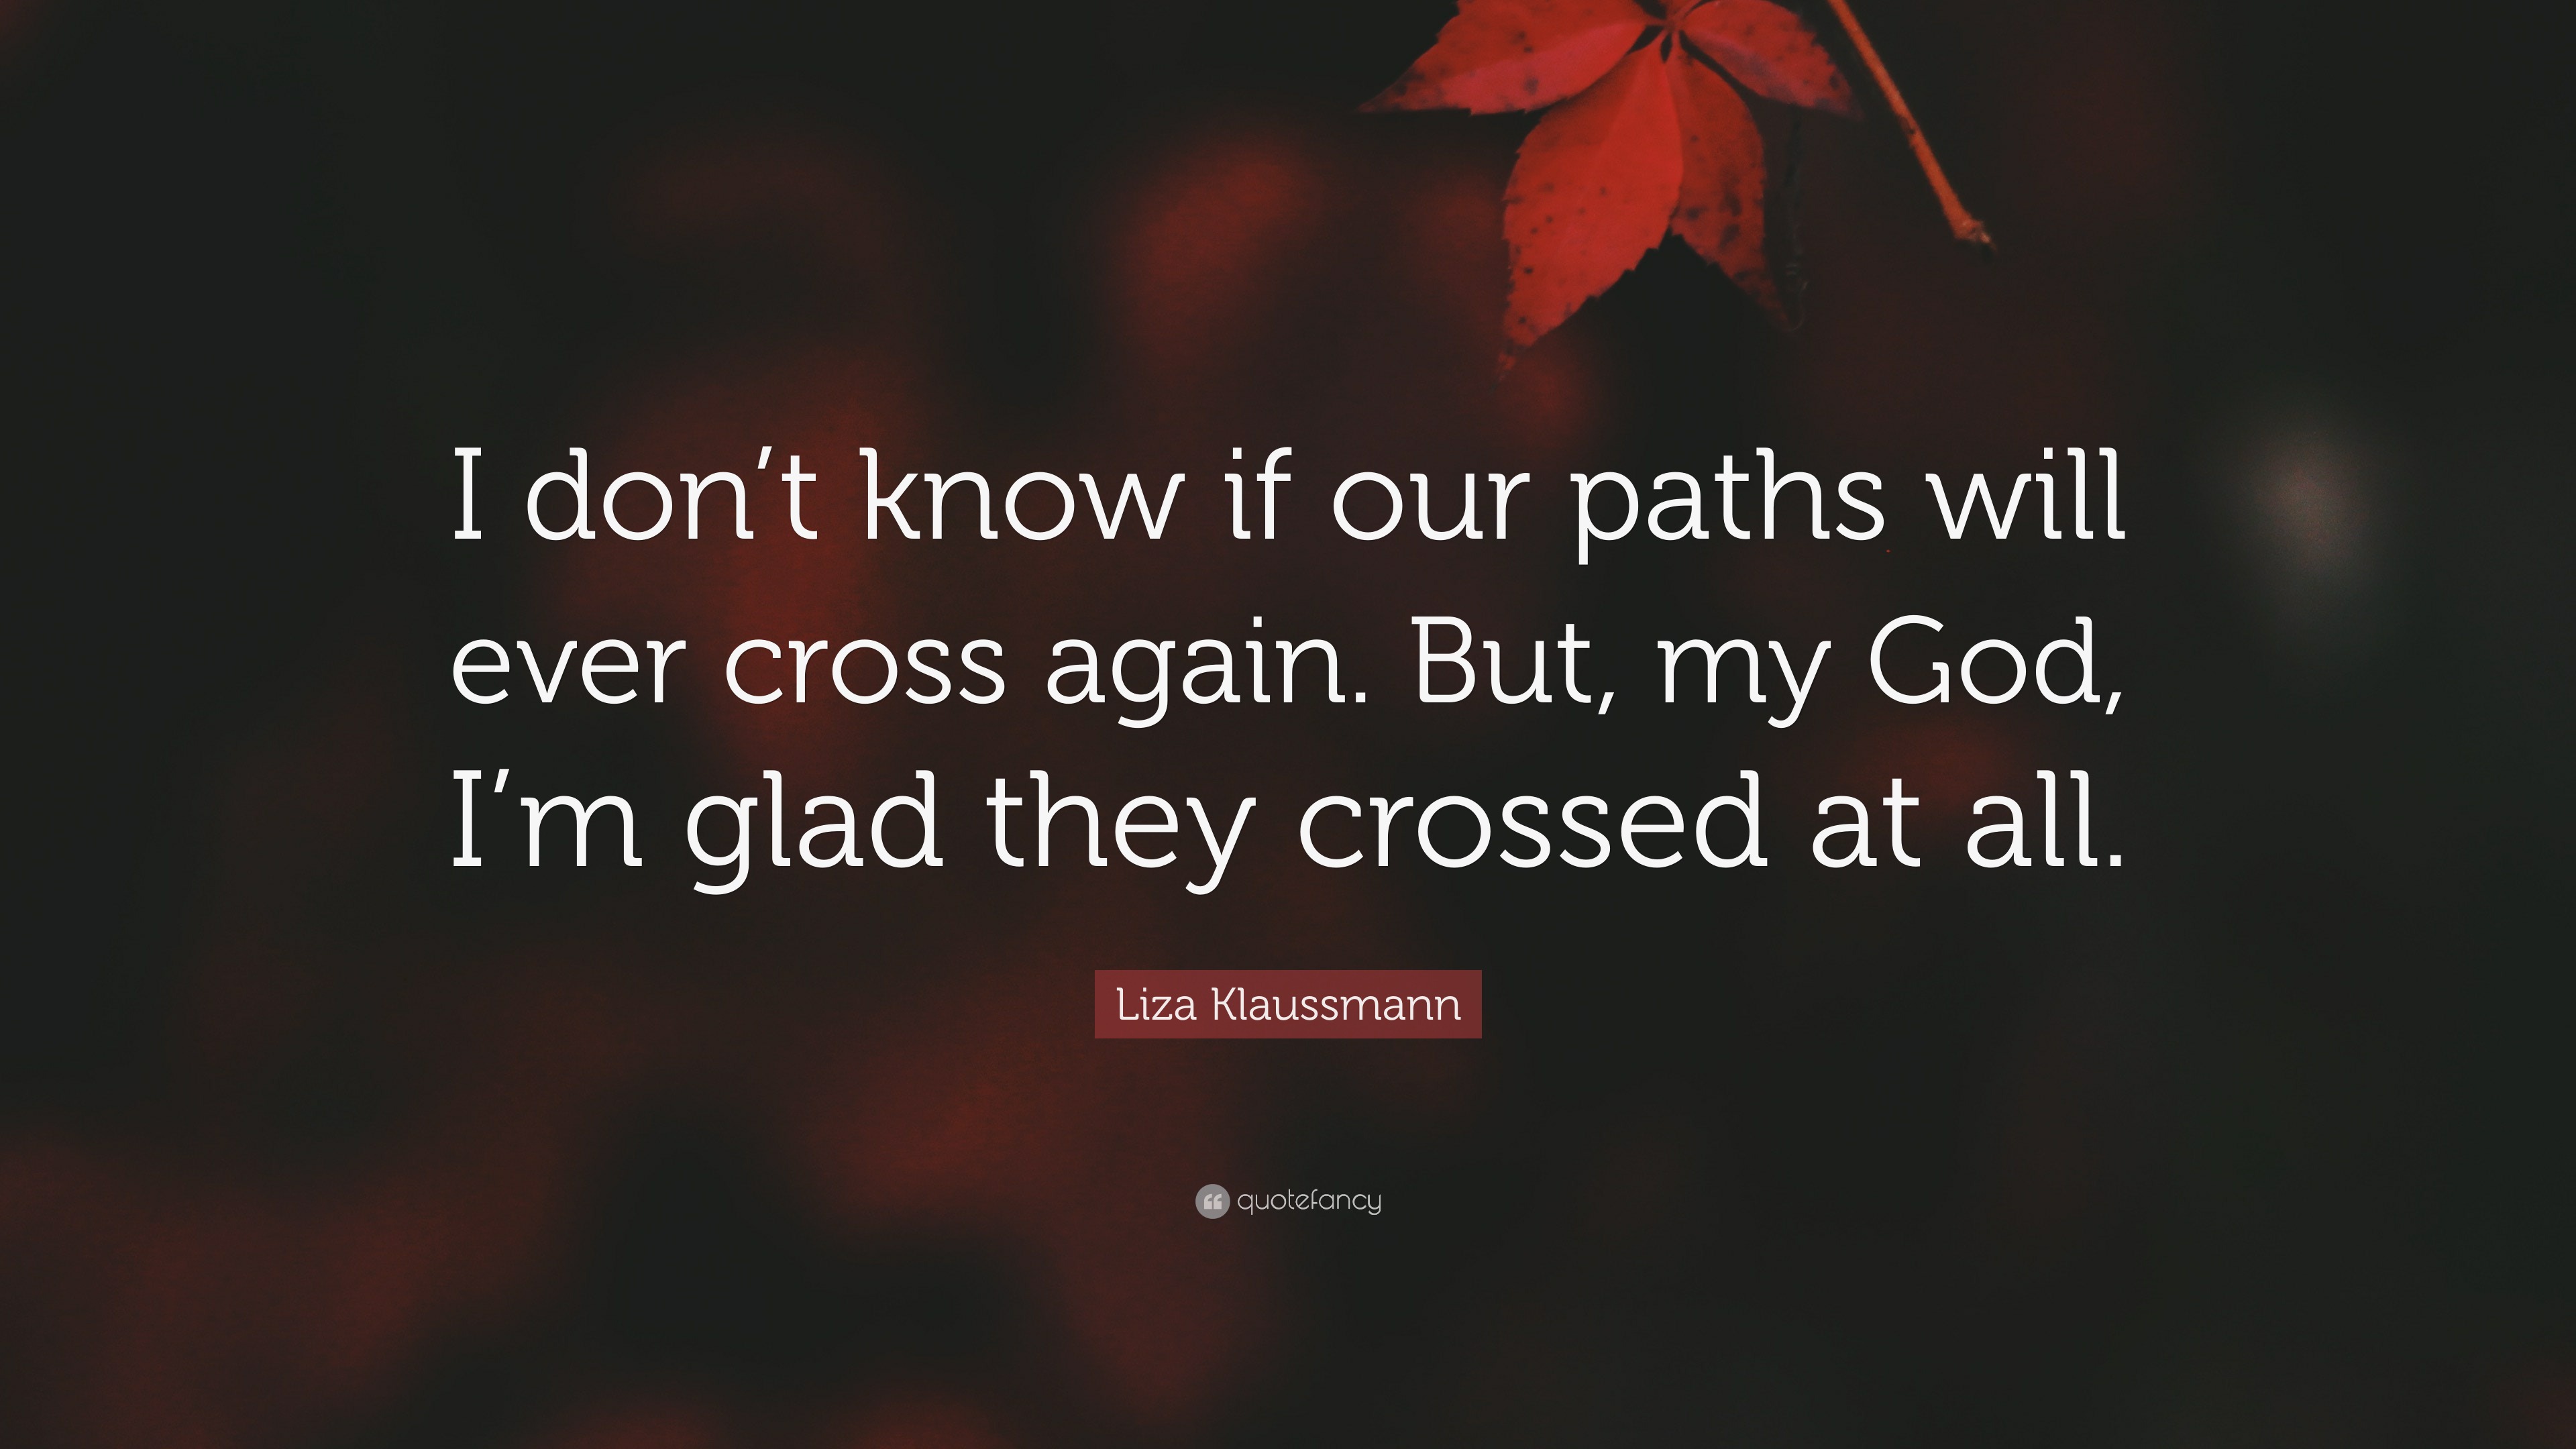 Liza Klaussmann Quote: “I don't know if our paths will ever cross again.  But, my